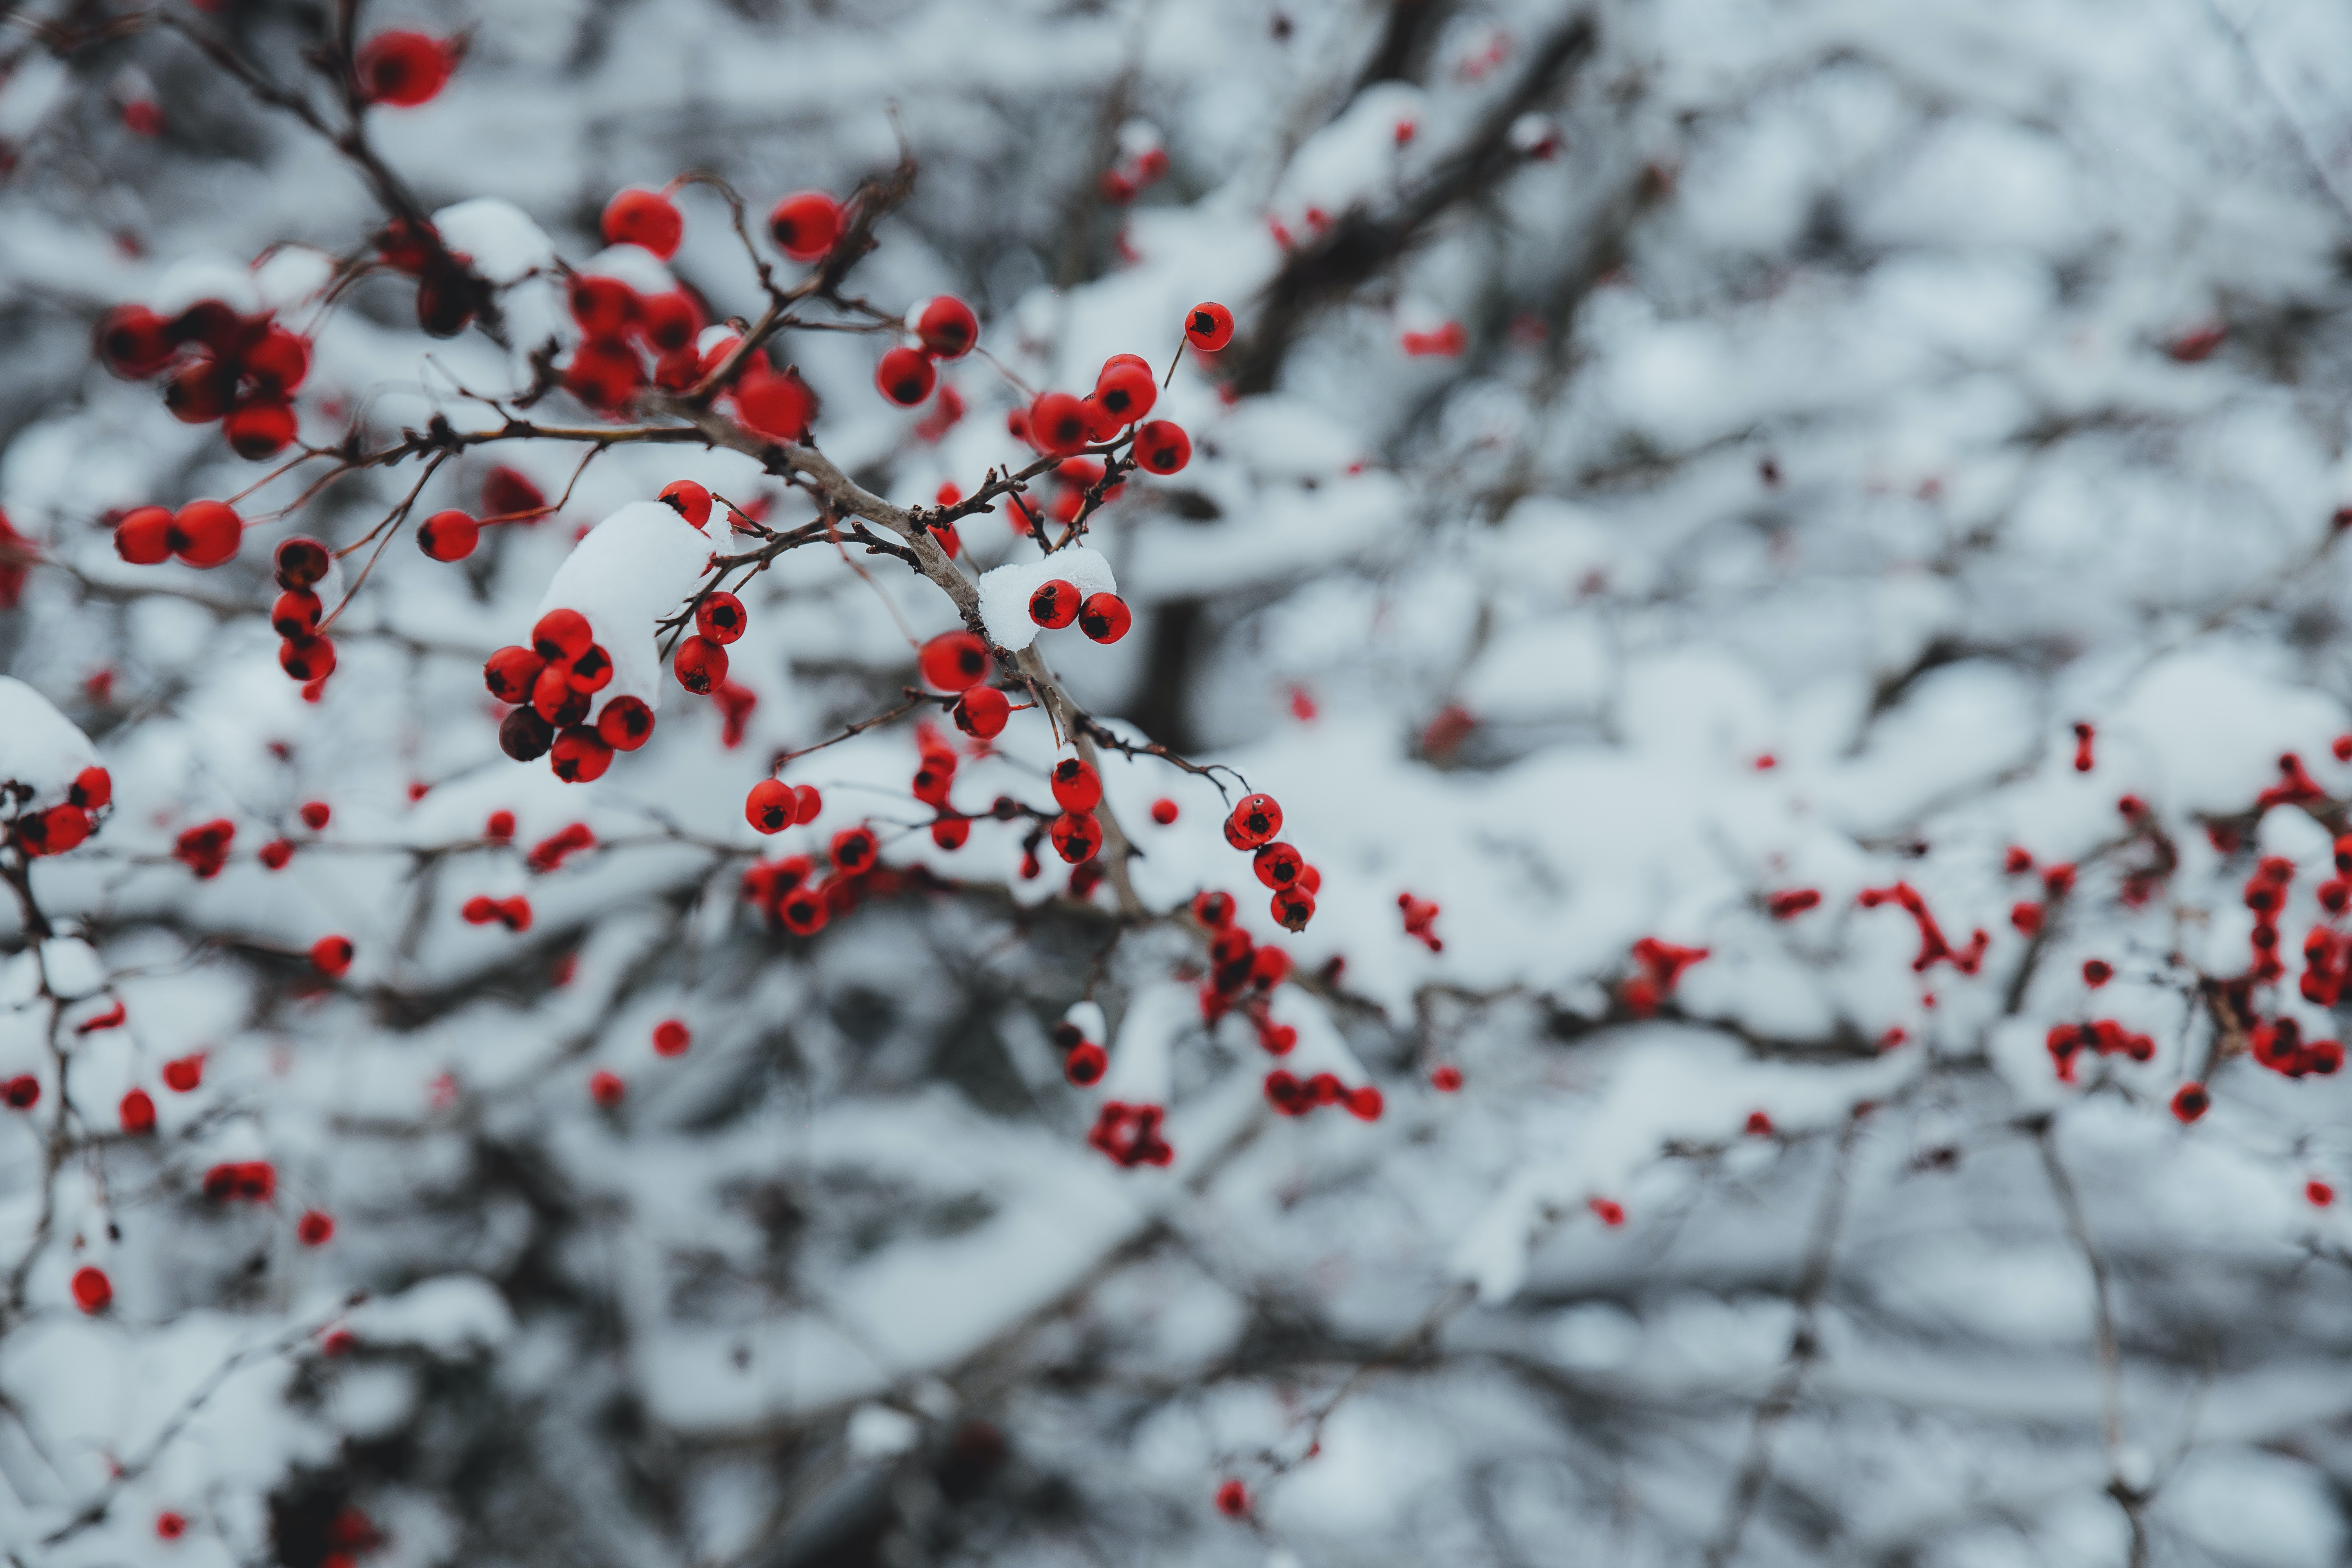 Snowy Christmas Backgrounds